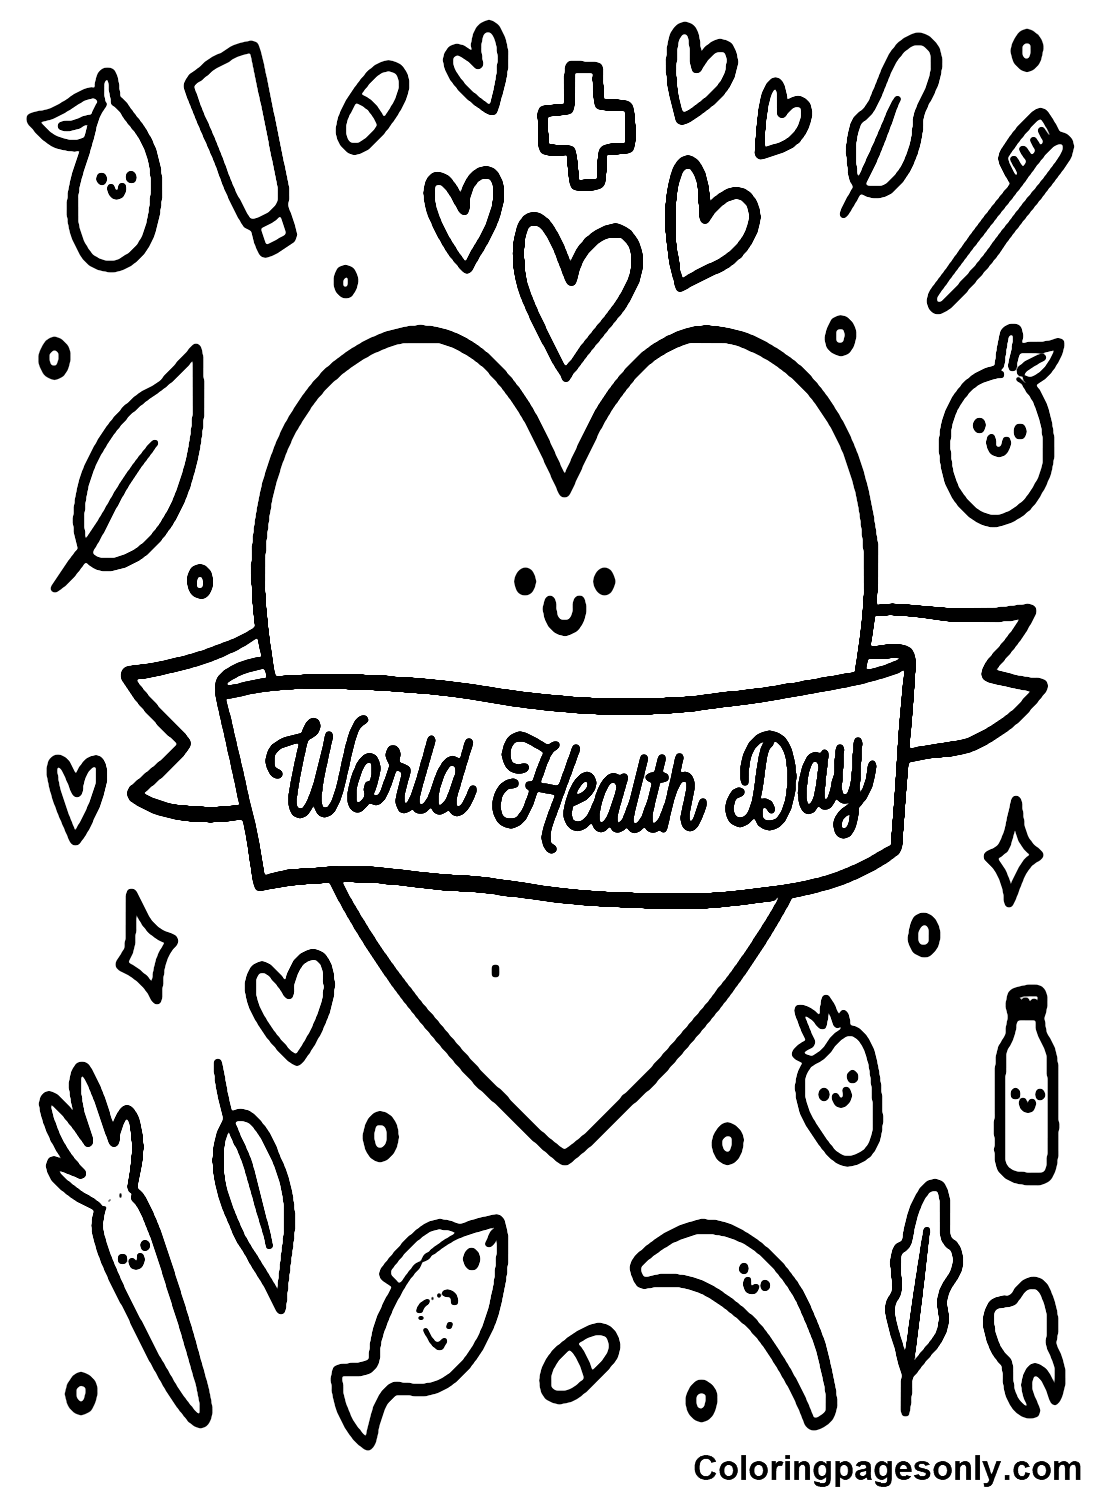 World Health Day Free Printable Coloring Page